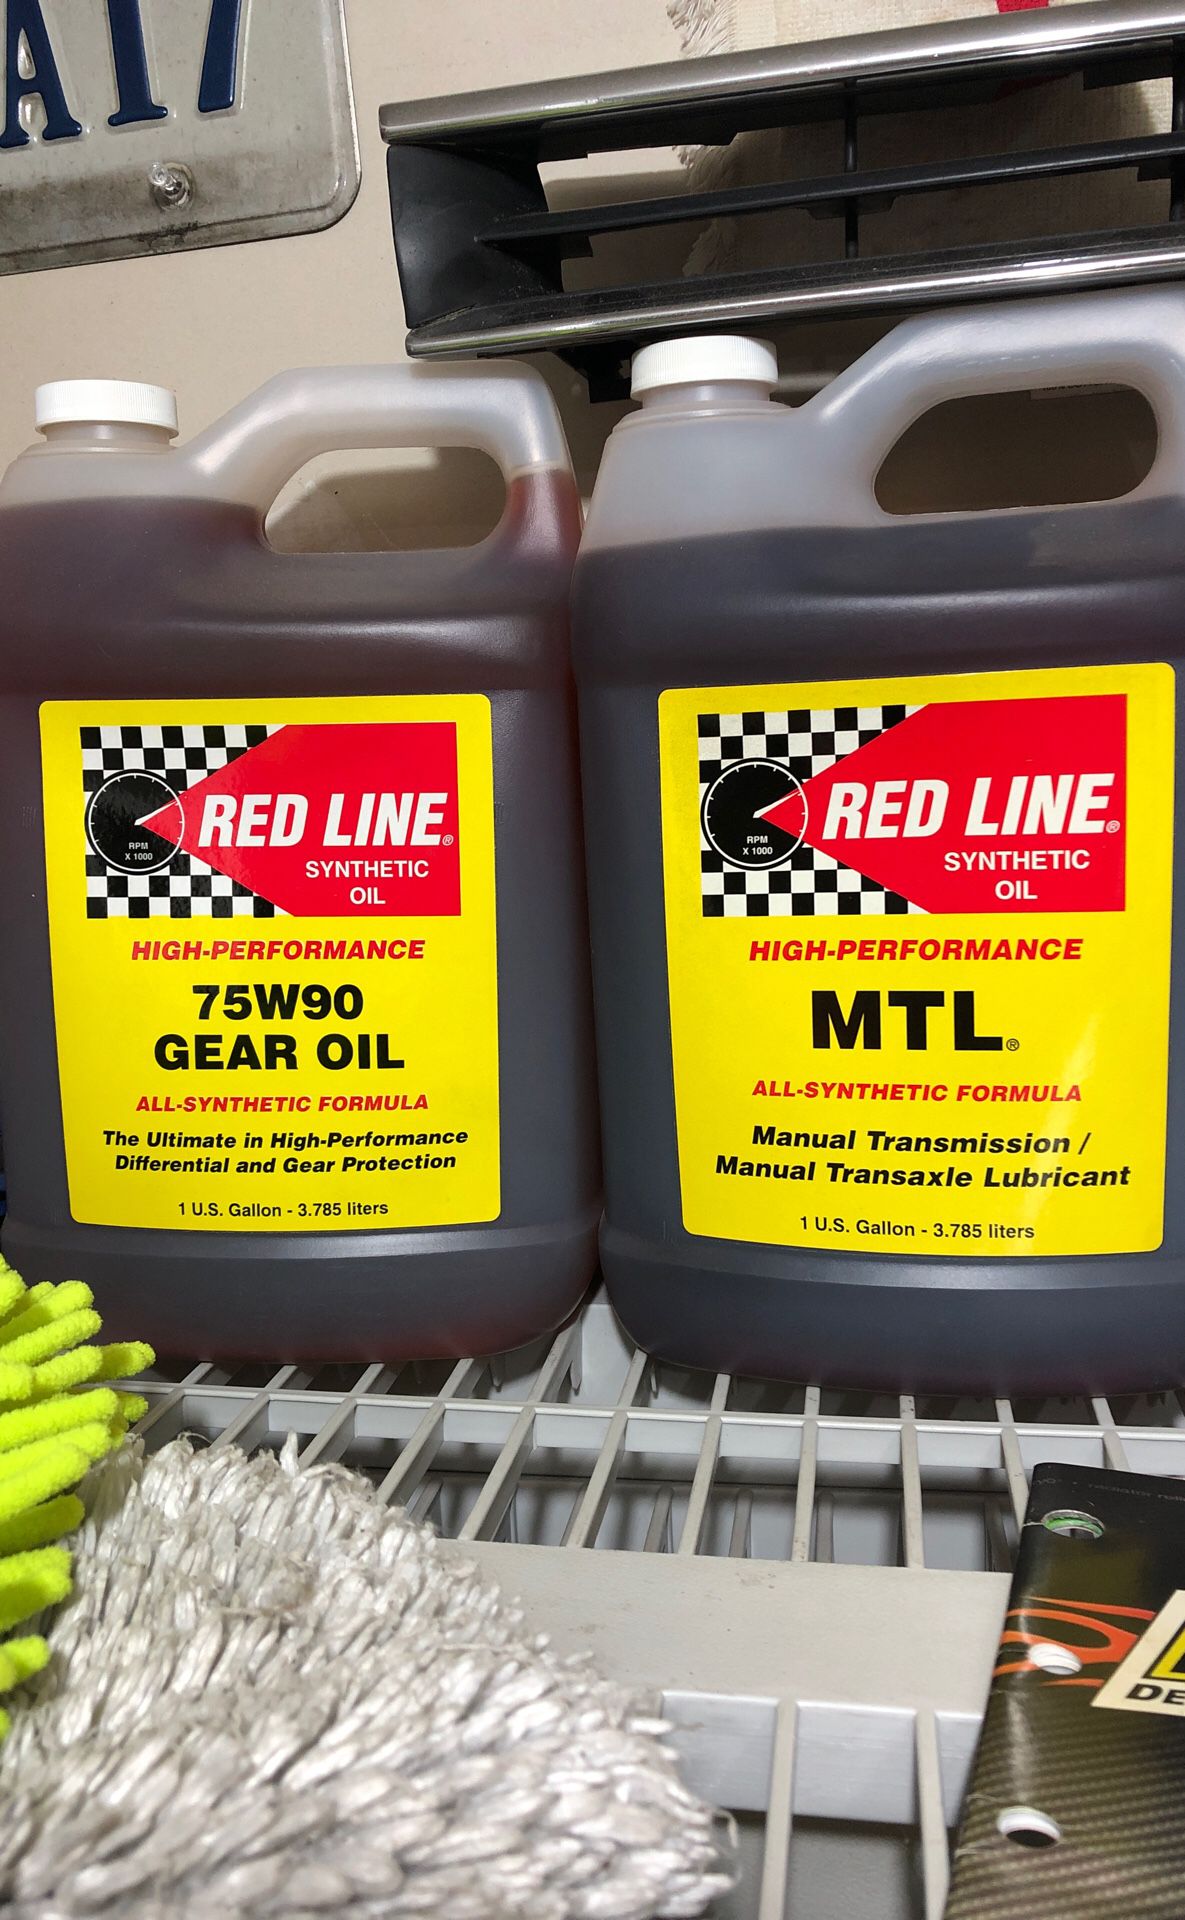 RED LINE Synthetic Oil (High- performance)